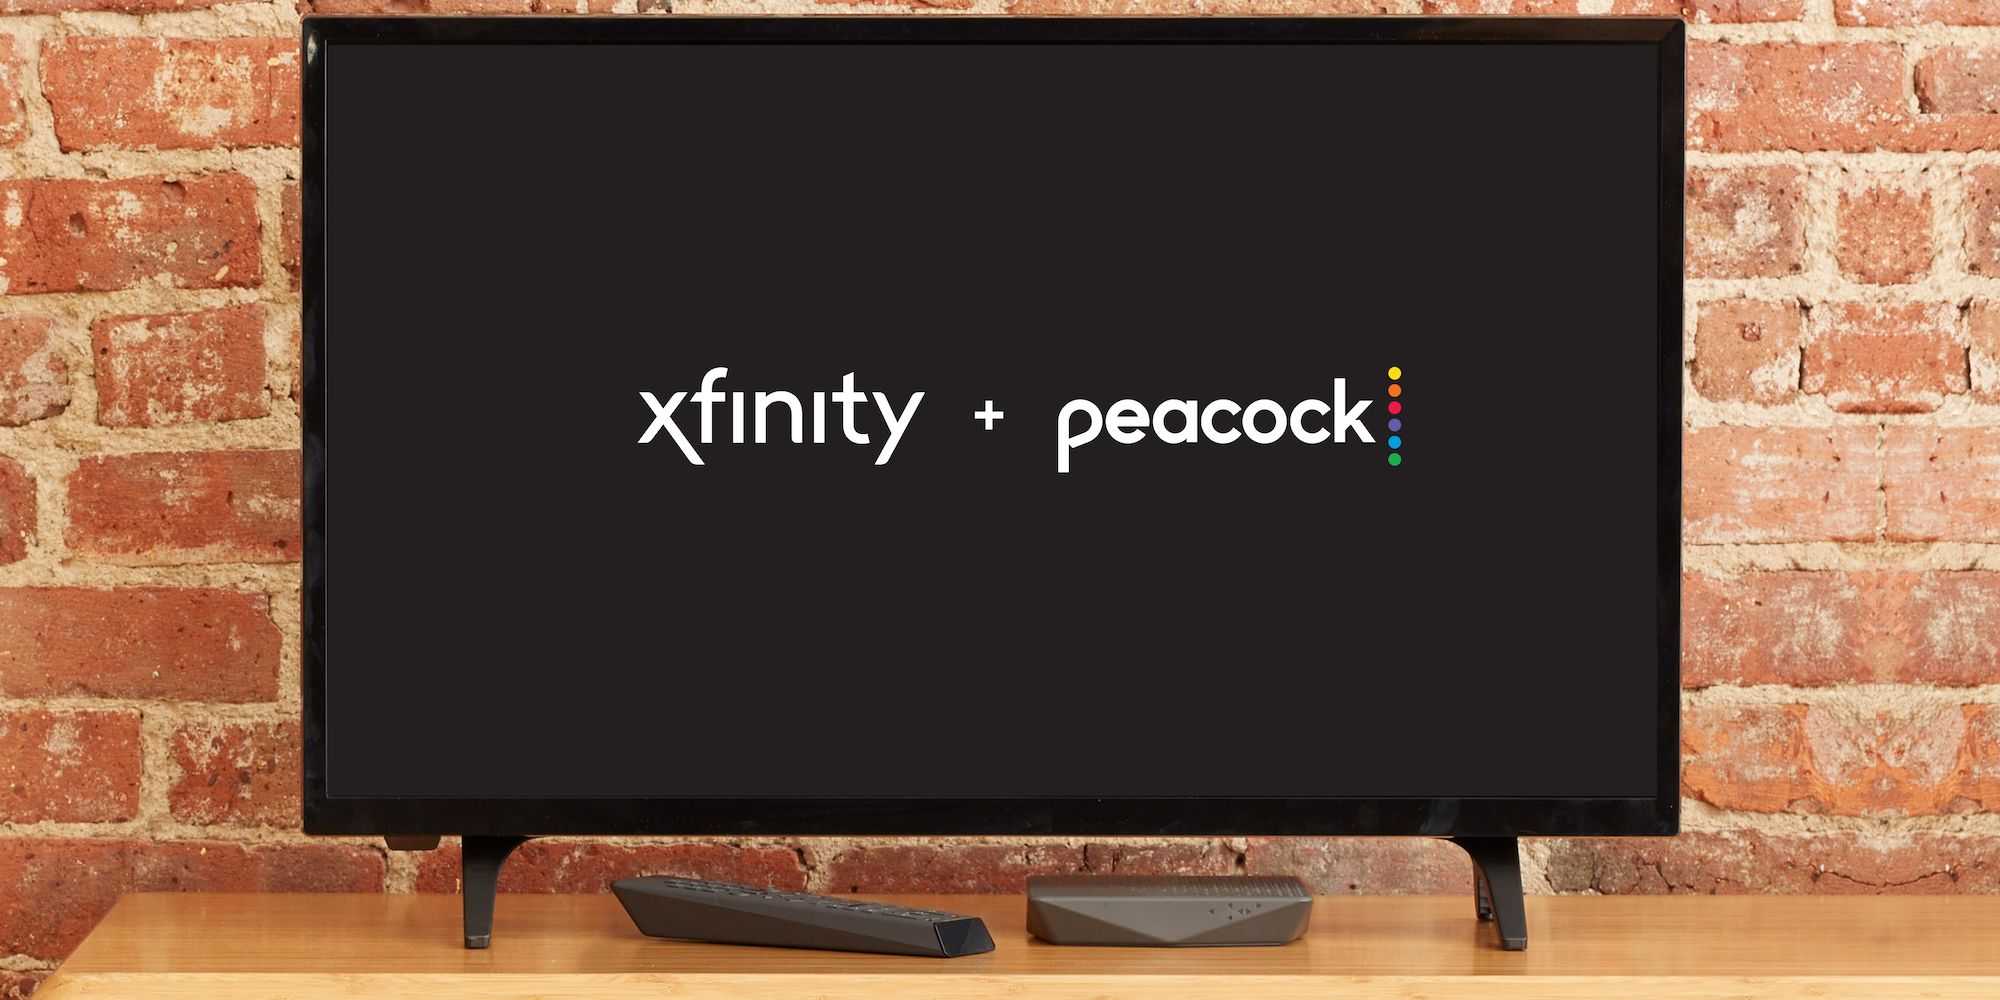 Comcast to End Peacock Premium Free Promotion for Xfinity Customers